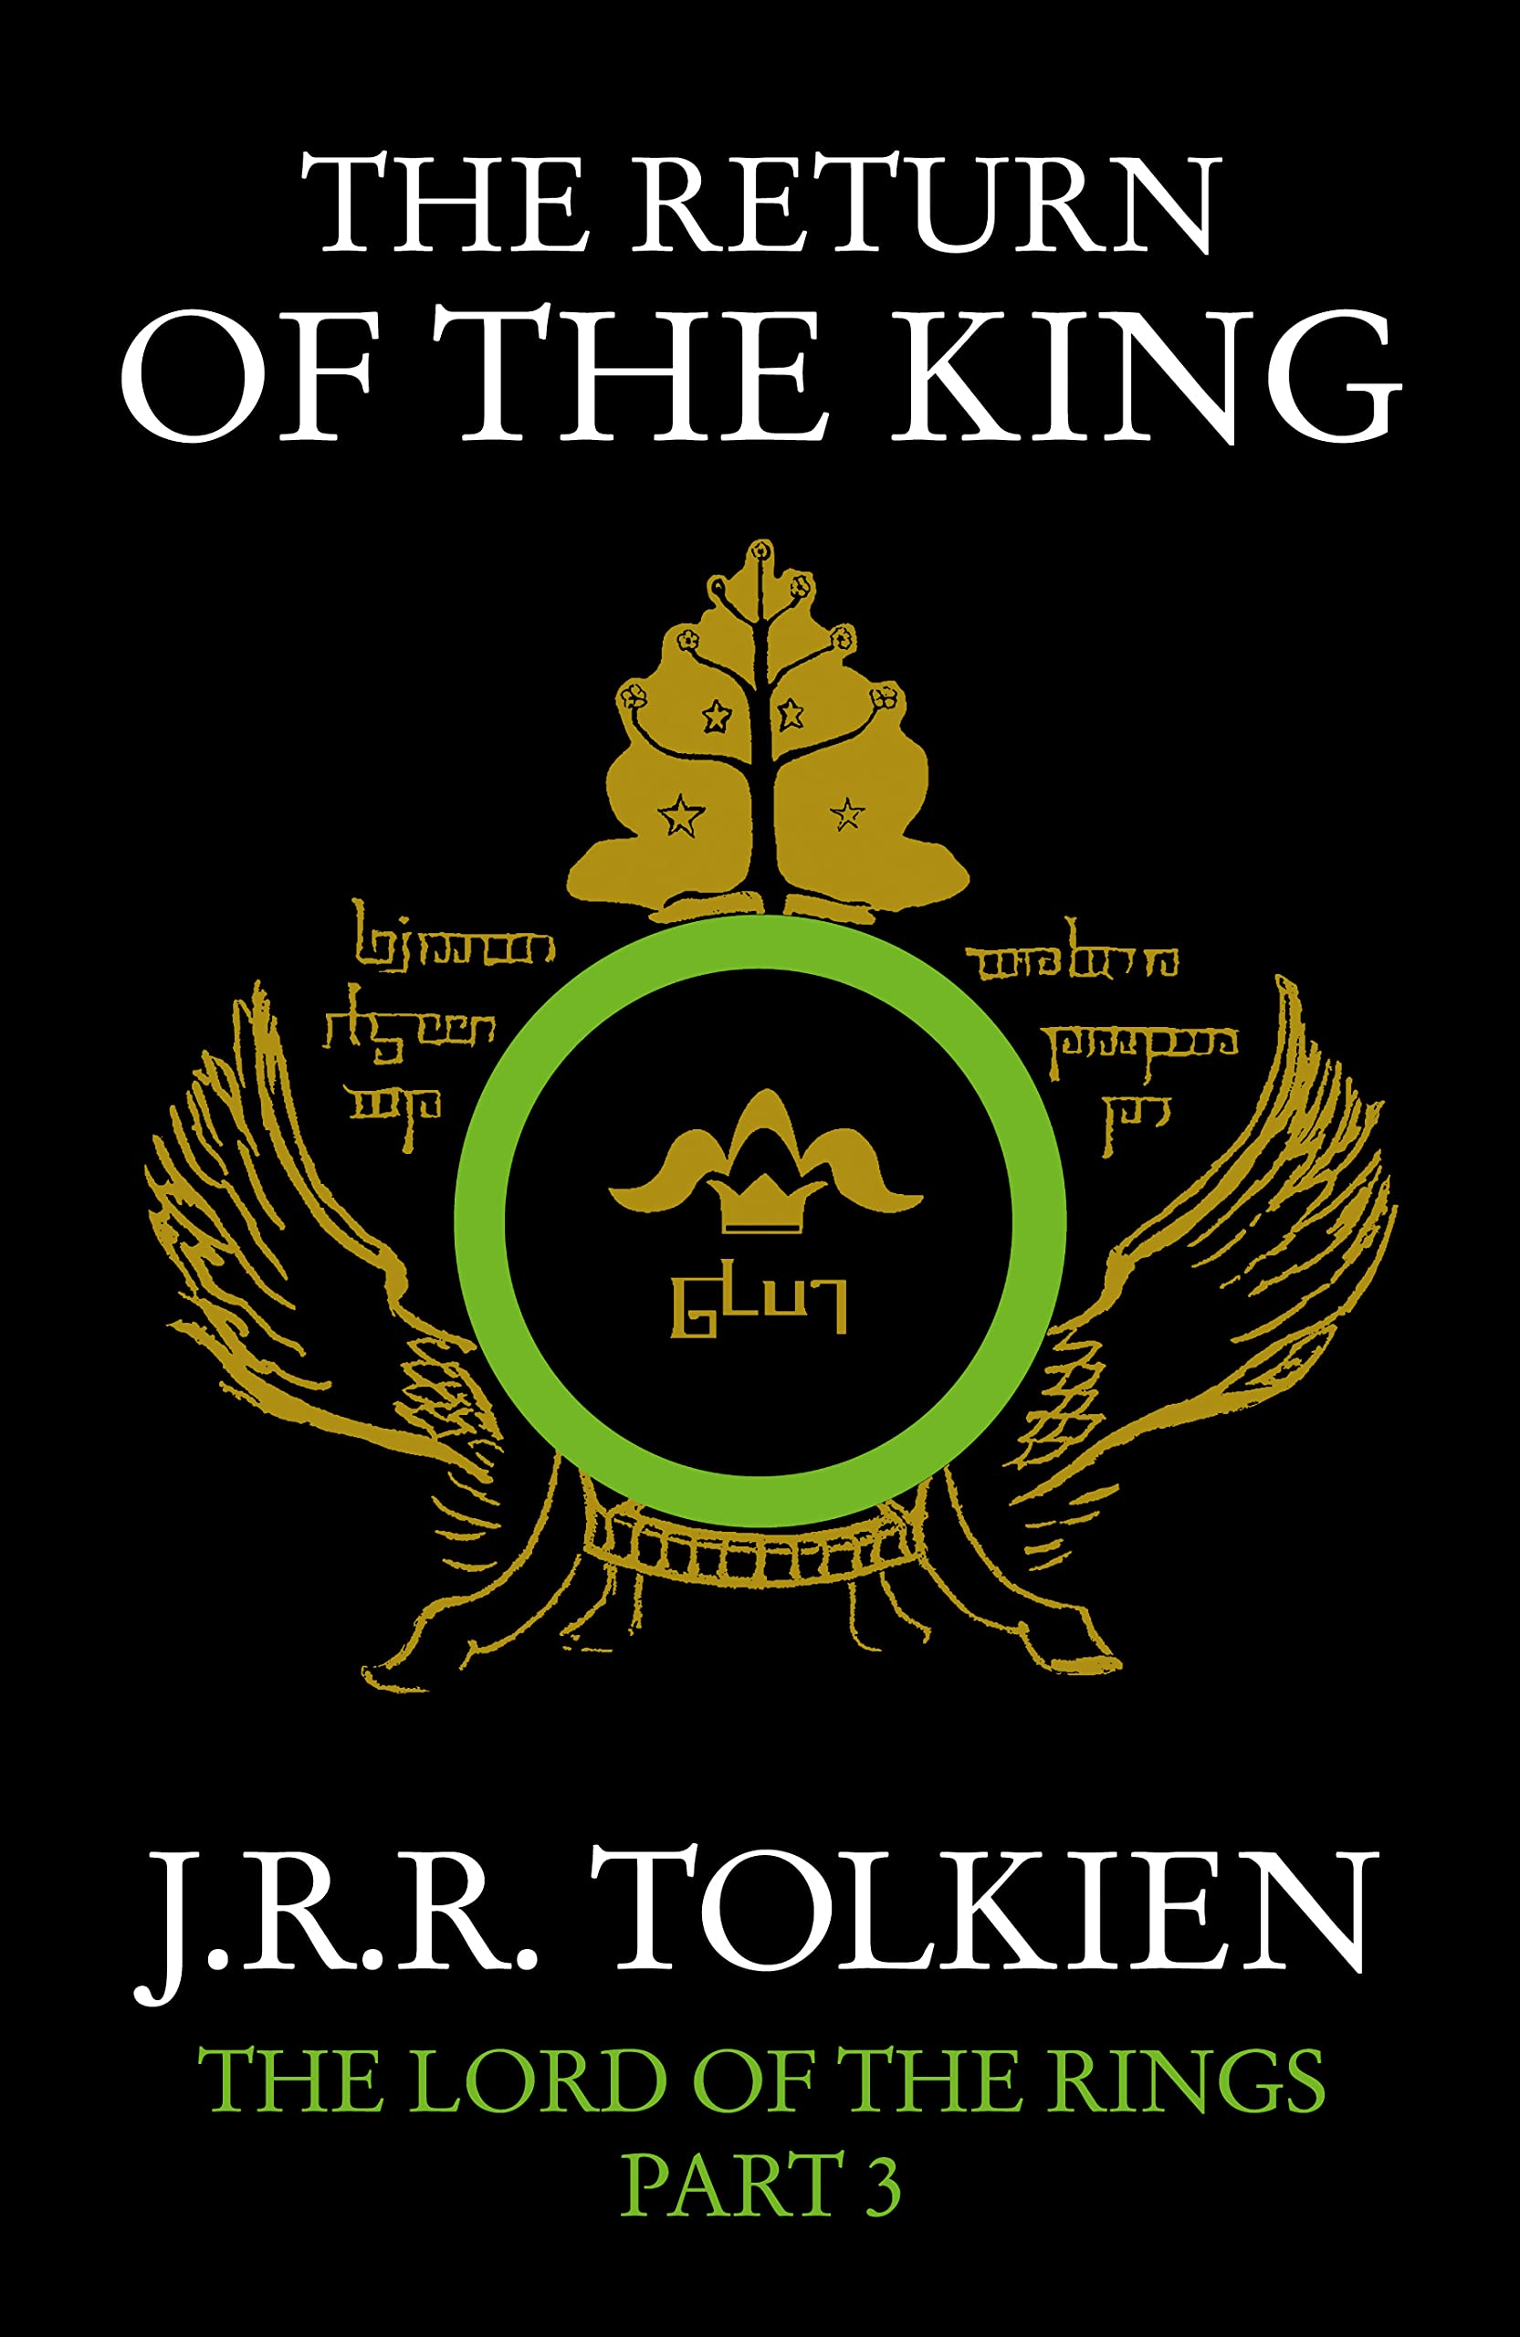 Lord of the Rings: Return of the King